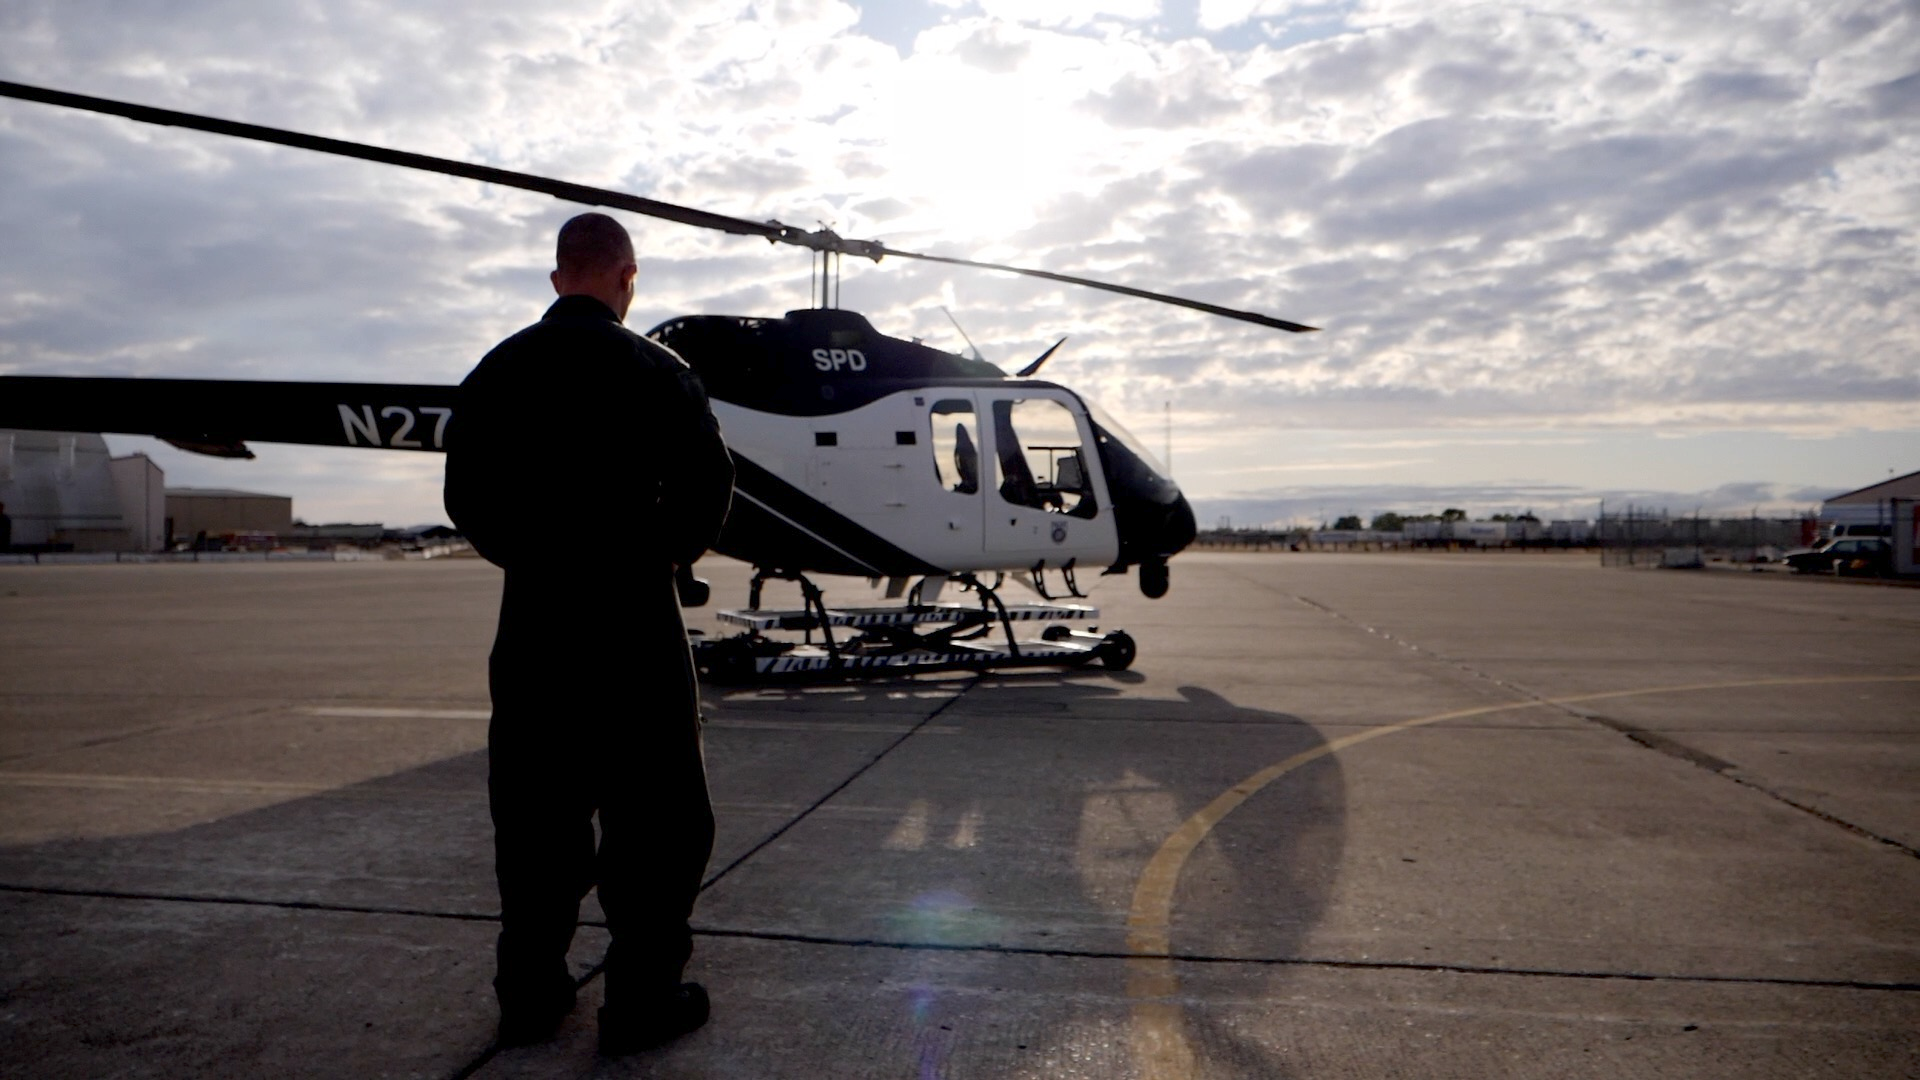 Photo of a Sacramento Police officer in their pilot's uniform, facing one of the Department's black and white helicopters in the background